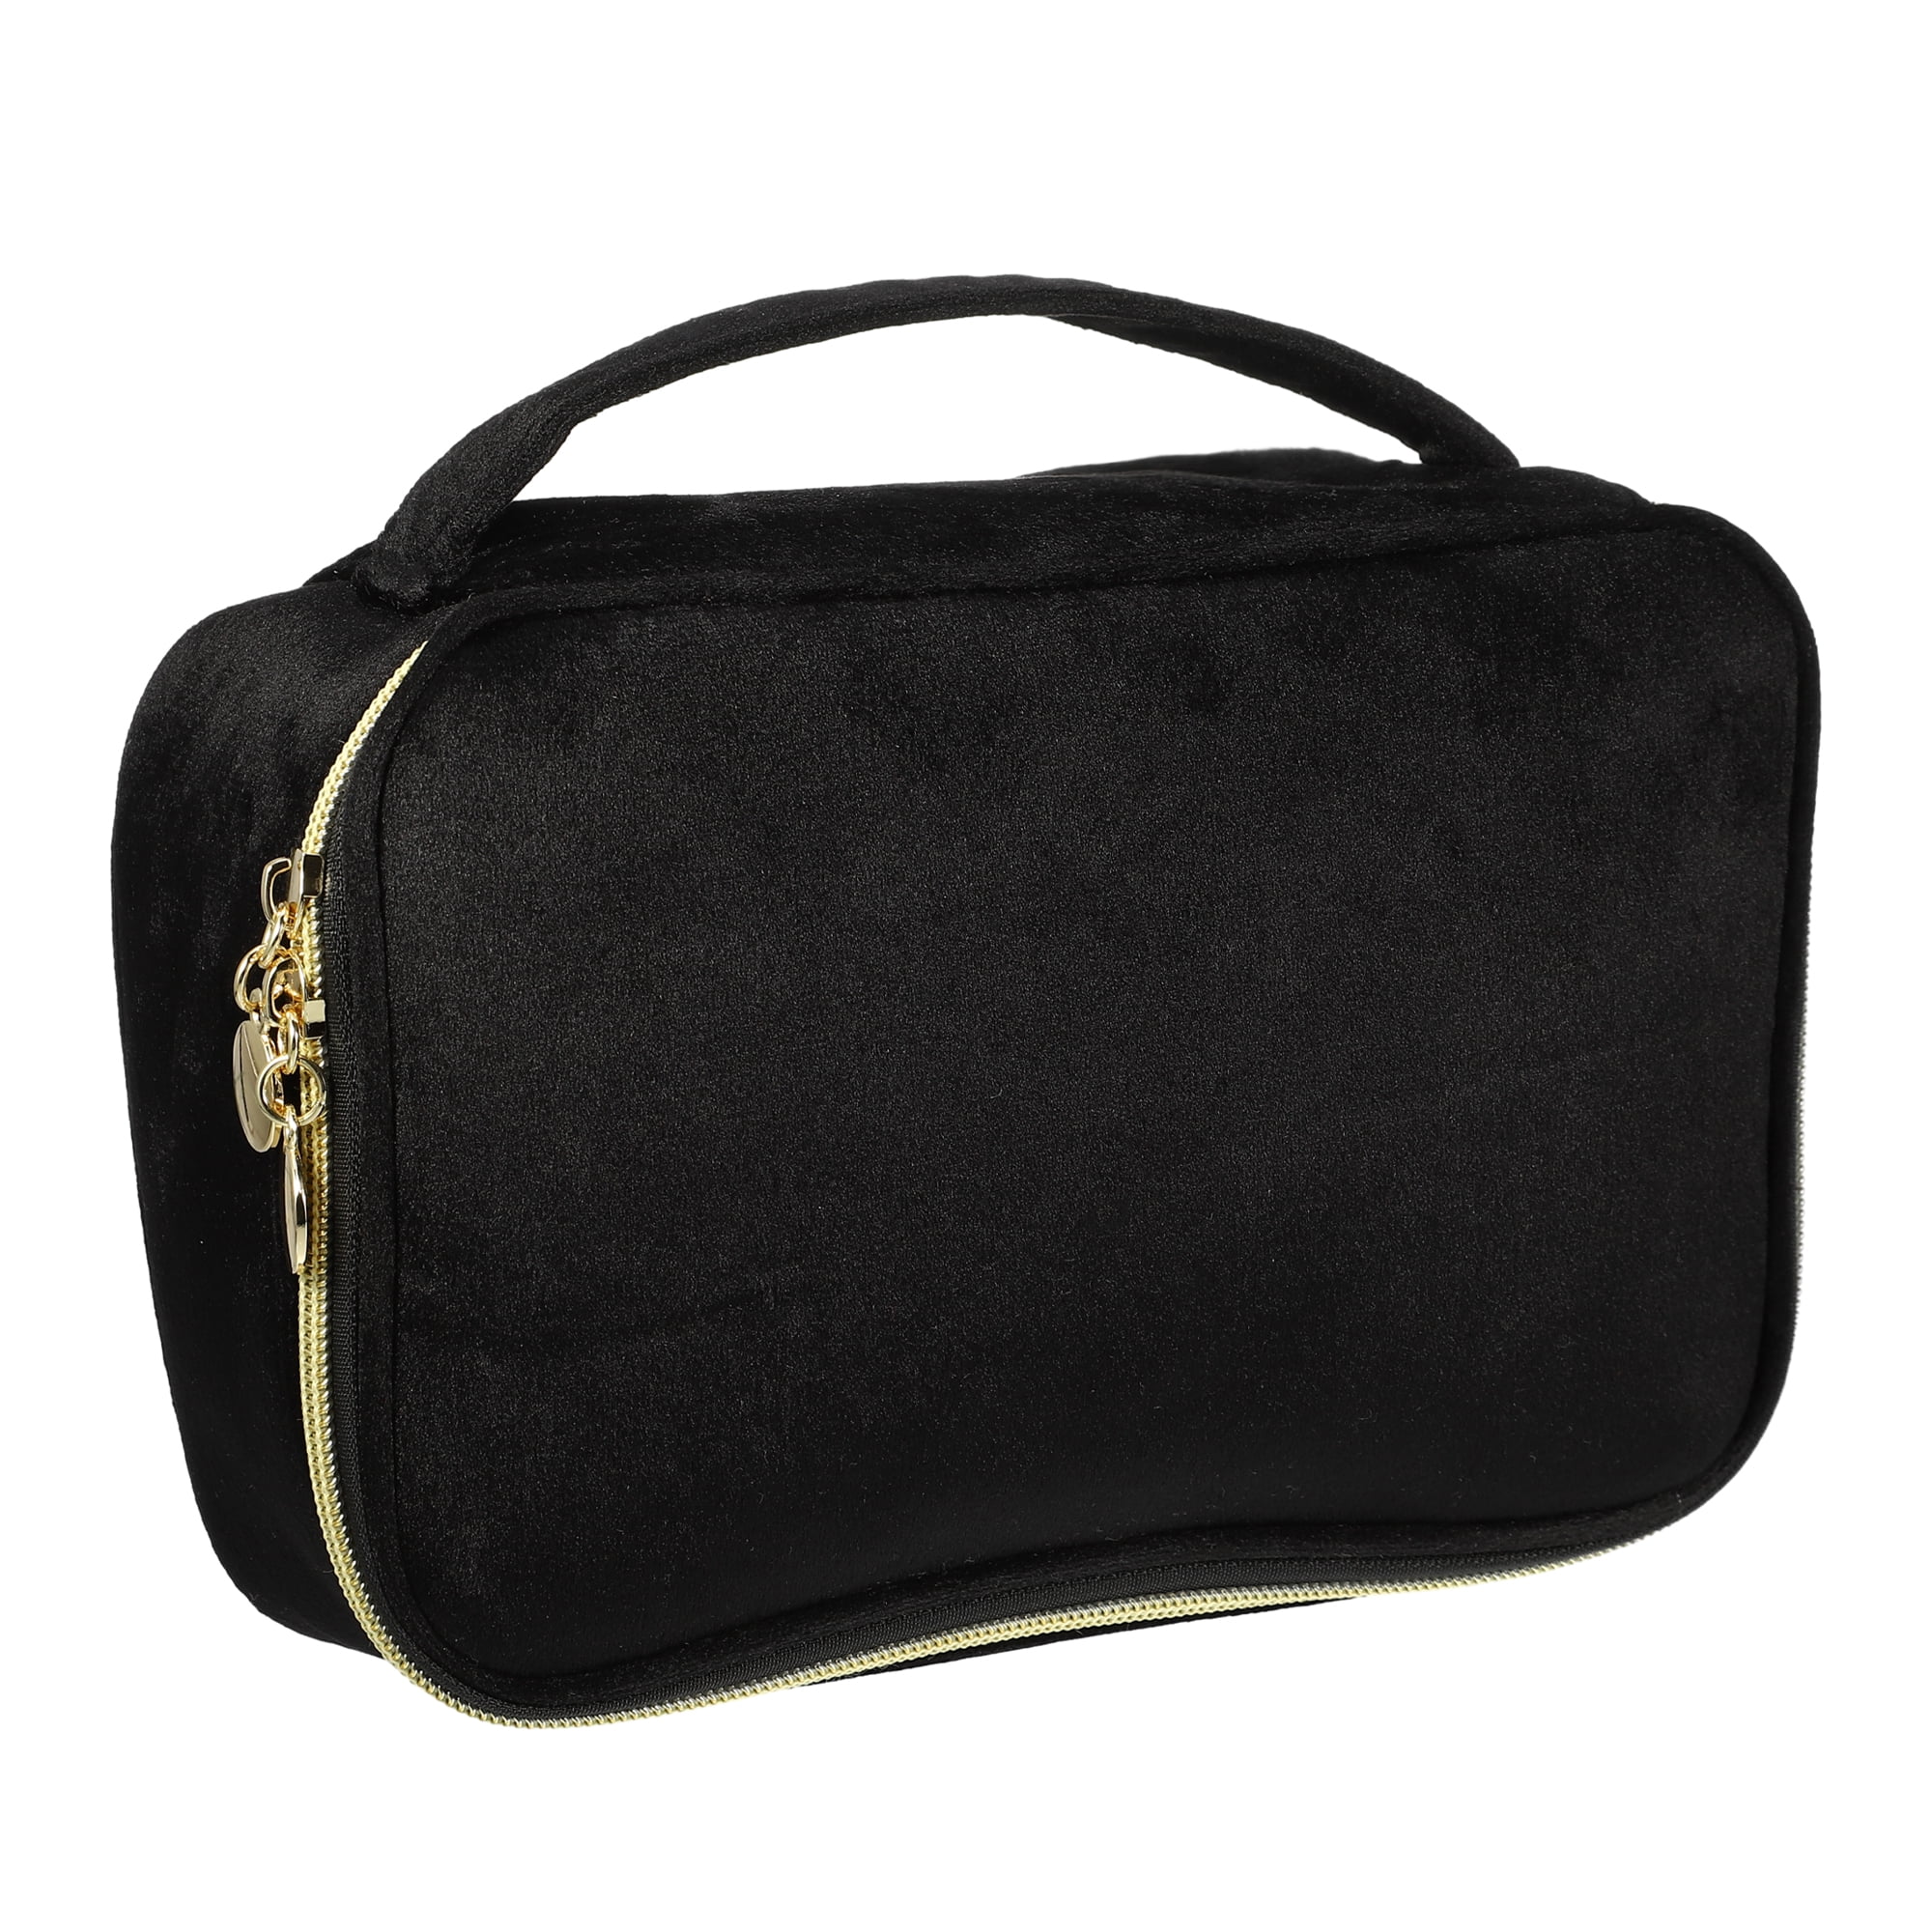 LYDZTION Velvet Makeup Bag Cosmetic Bag for Women,Large Capacity Canvas  Makeup Bags Travel Toiletry Bag Accessories Organizer,Black - Yahoo Shopping